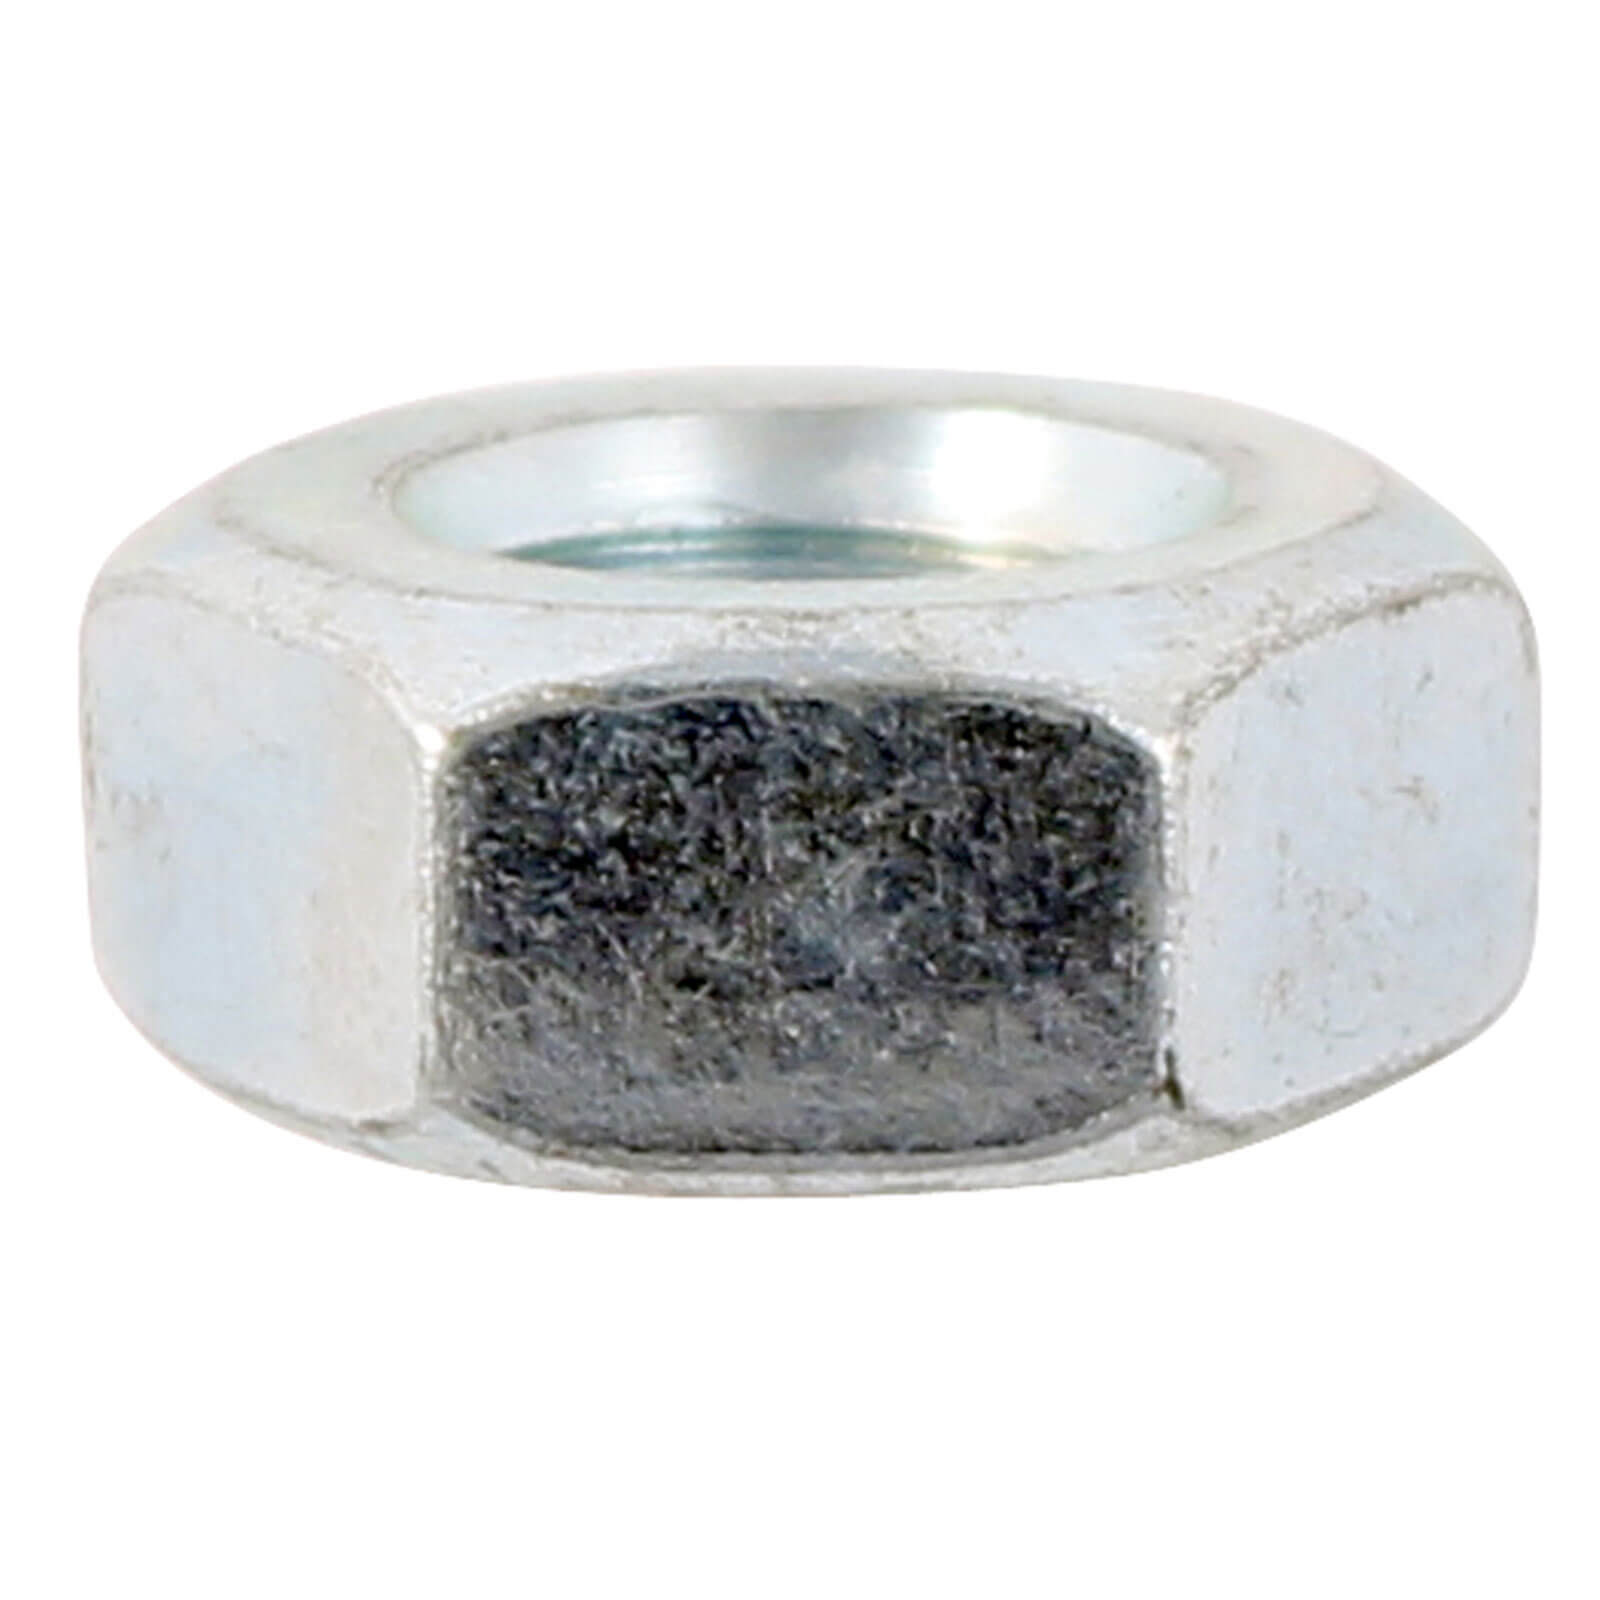 Image of Sirius A4 316 Hex Full Nut Stainless Steel M5